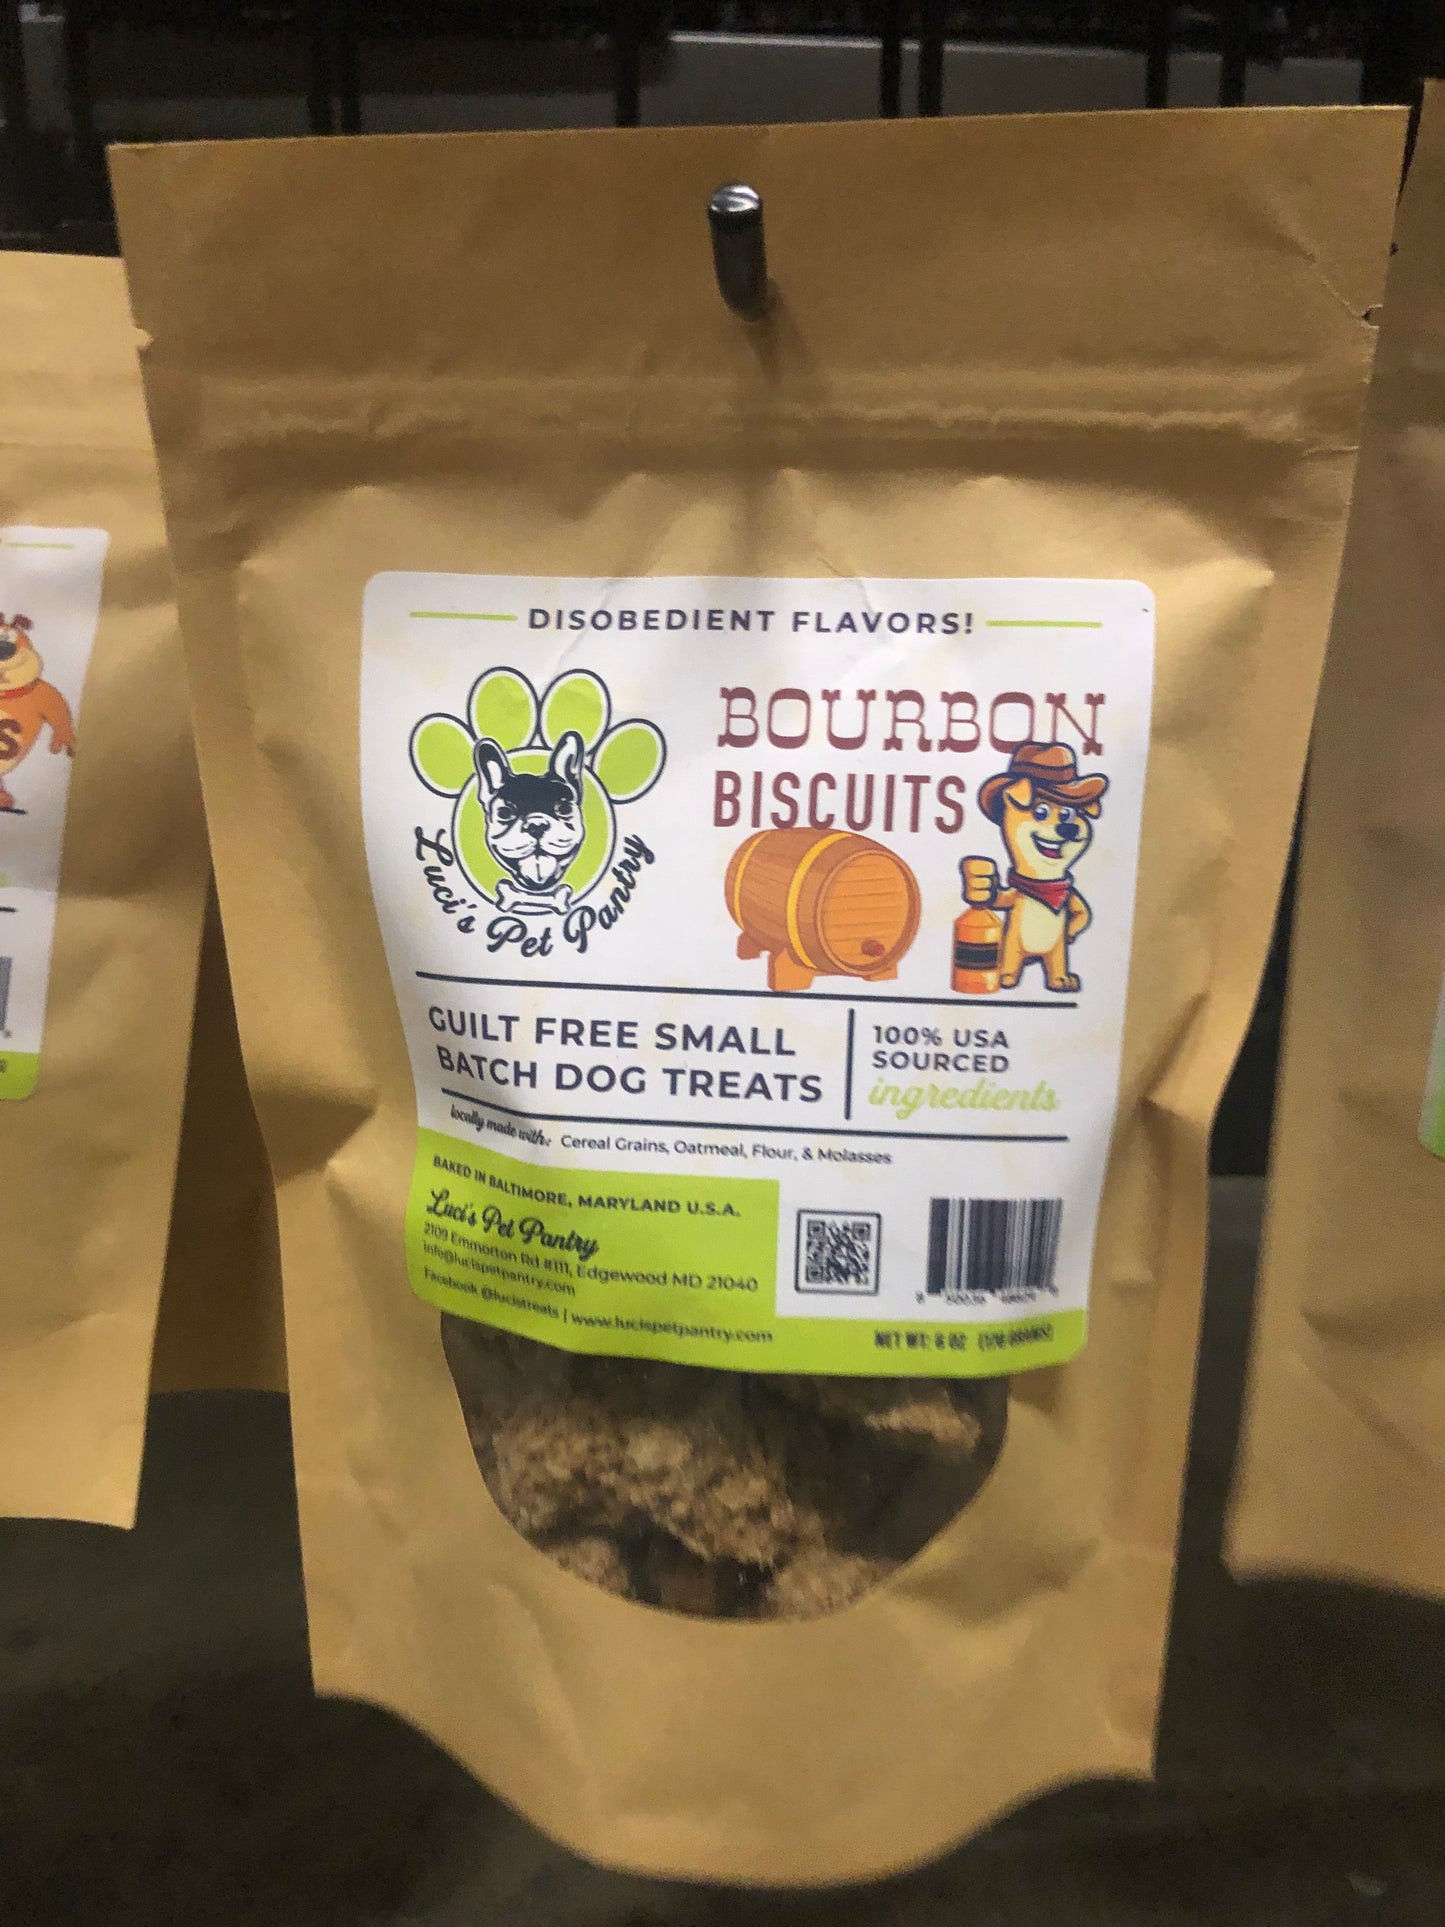 Whiskey Biscuits - All Natural "Cereal Grains" Dog & Puppy Treats - Disobedient Biscuits 6 oz. Pouch